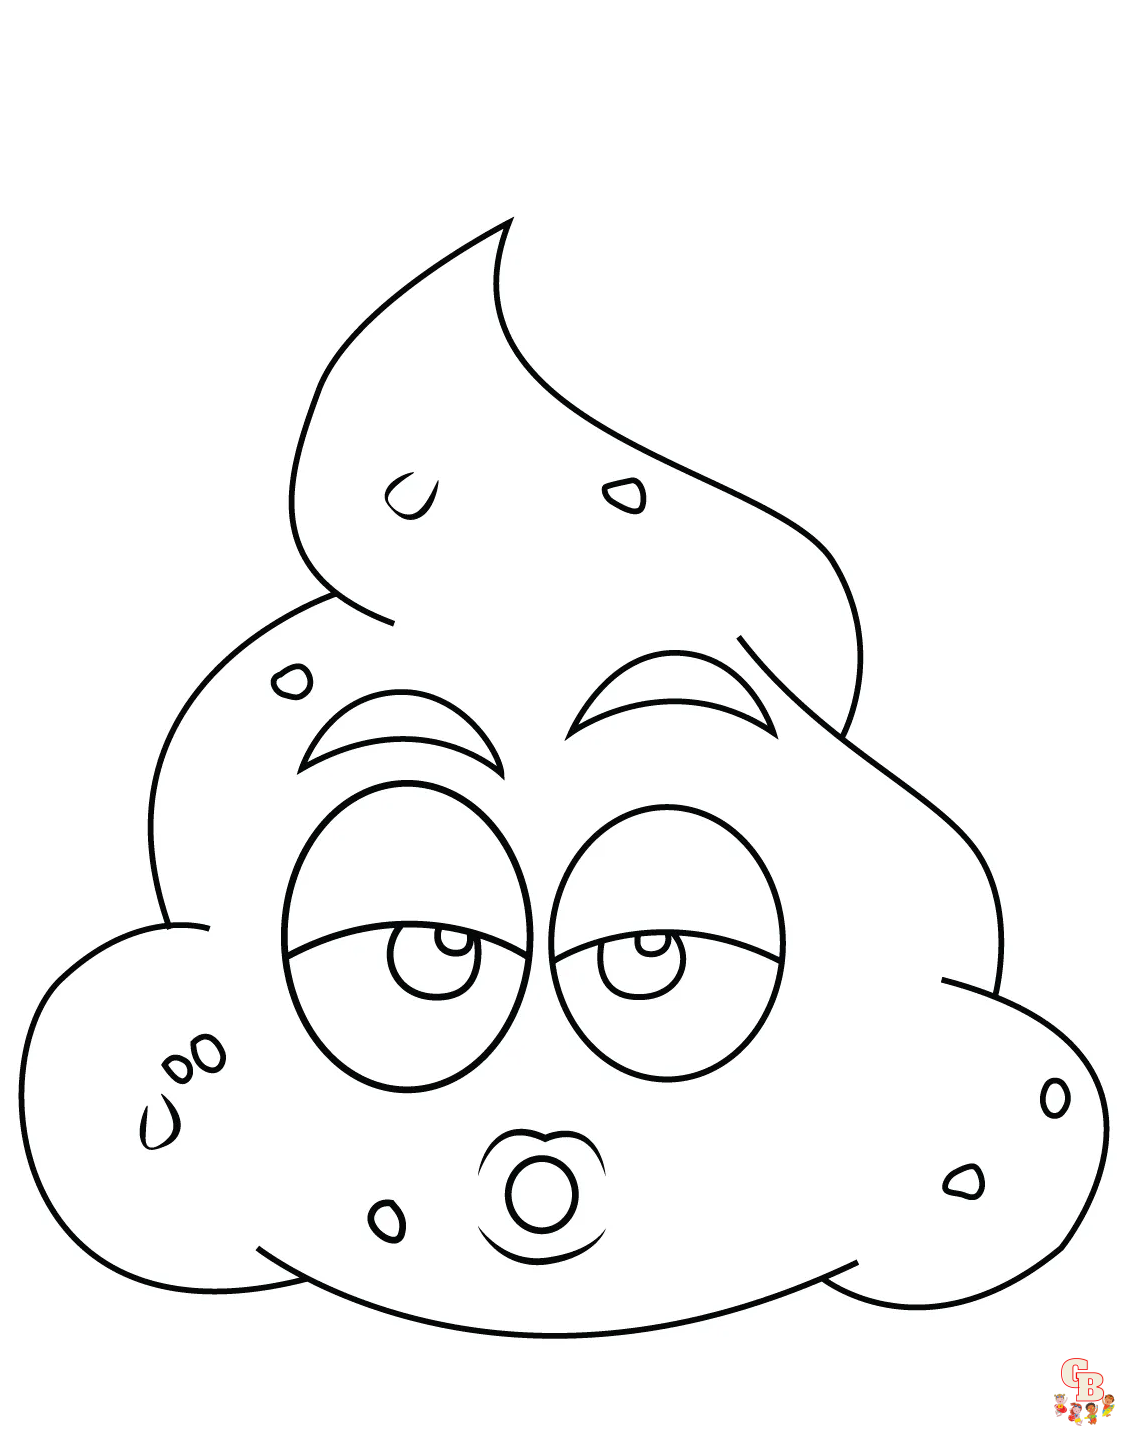 Color your world with poop coloring pages